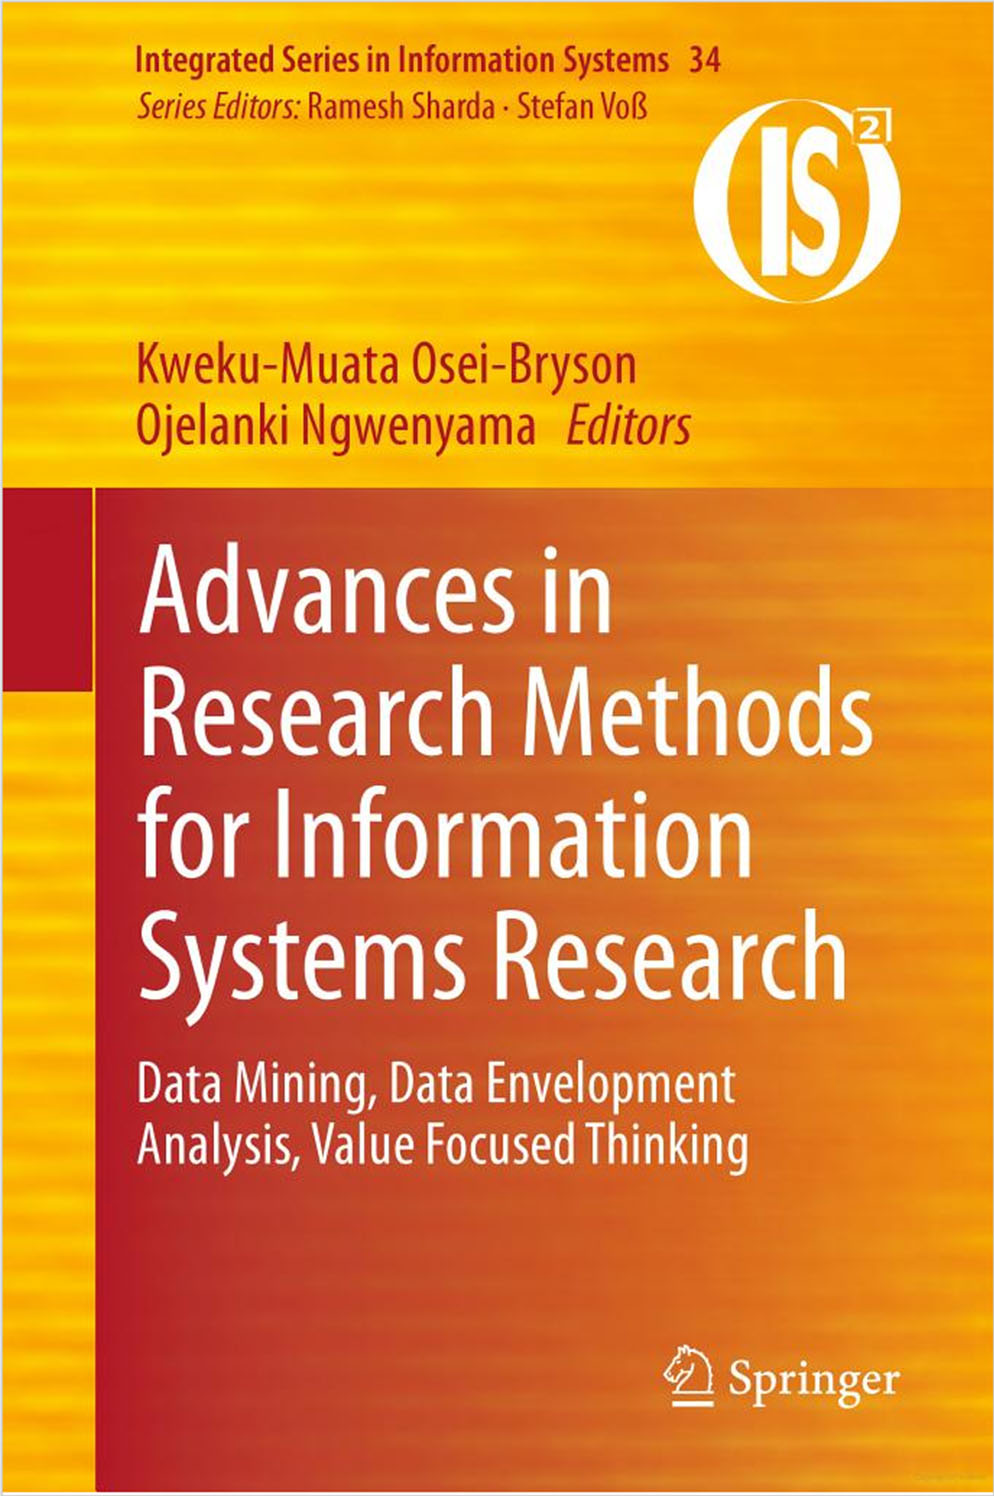 Advances in Research Methods for Information Systems Research (2014) Book Cover